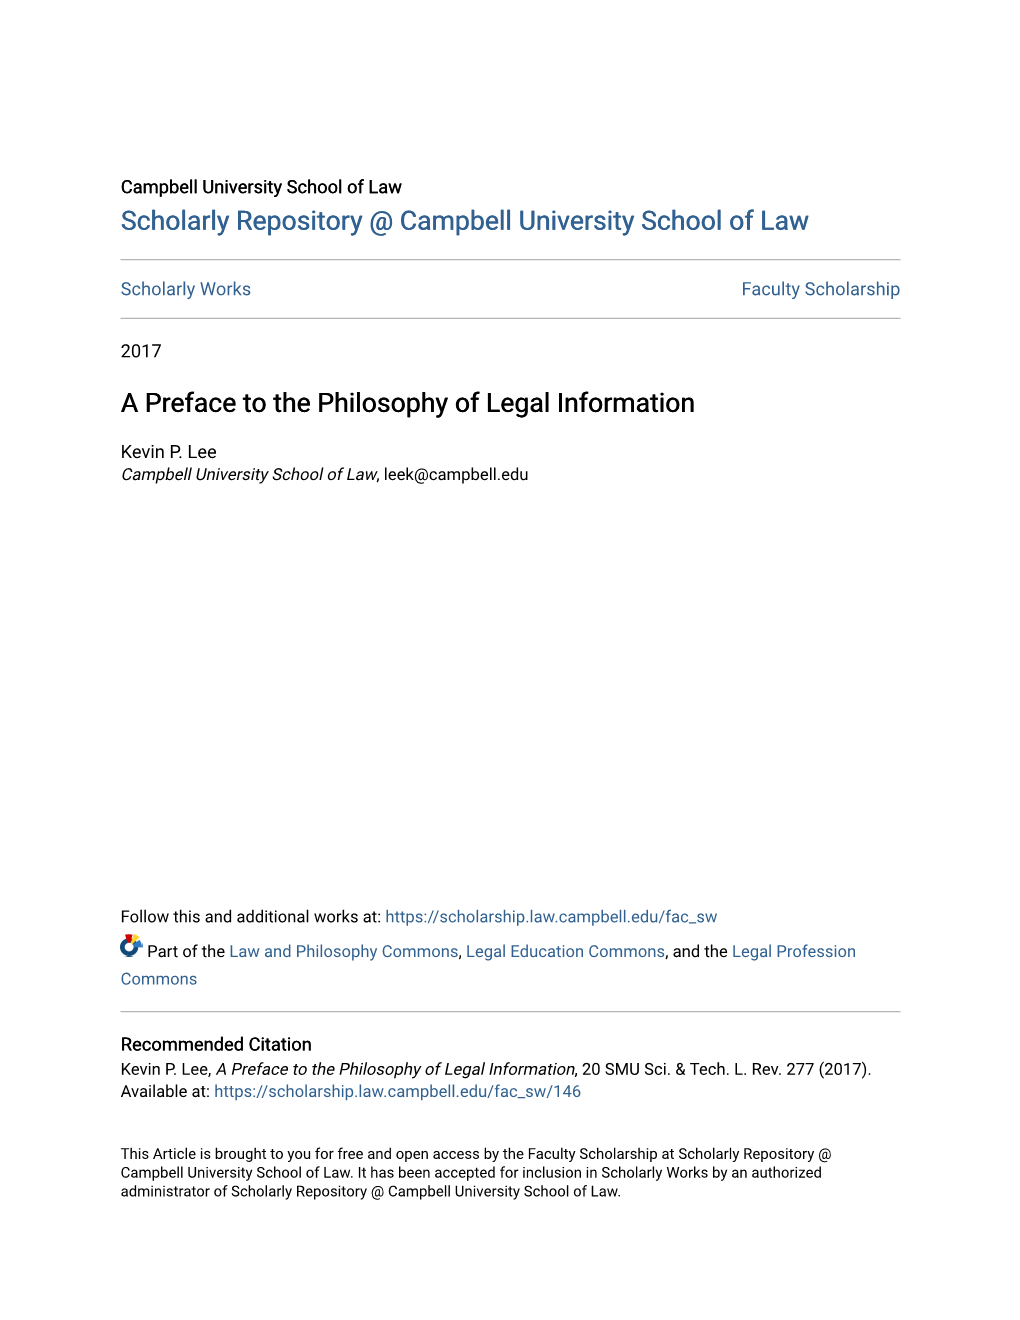 A Preface to the Philosophy of Legal Information